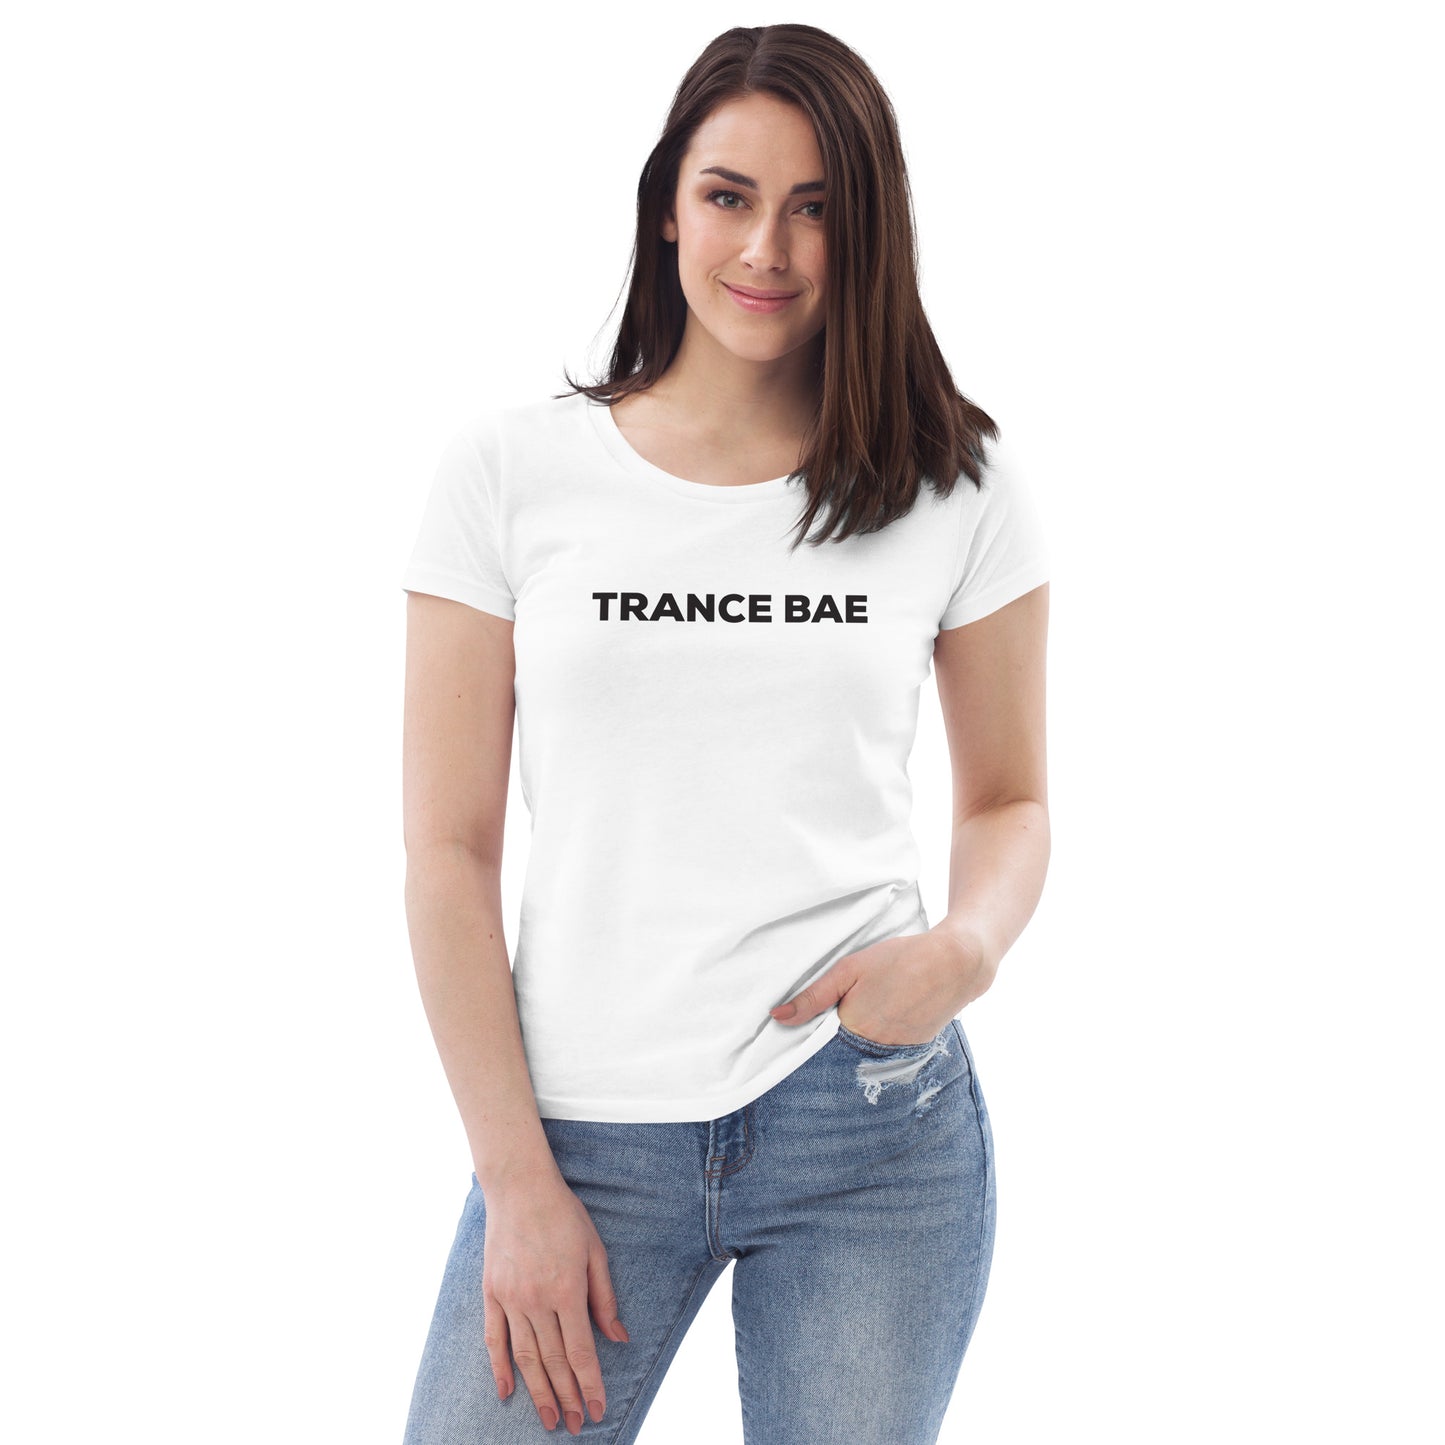 Trance Bae - Women's Fitted T-Shirt